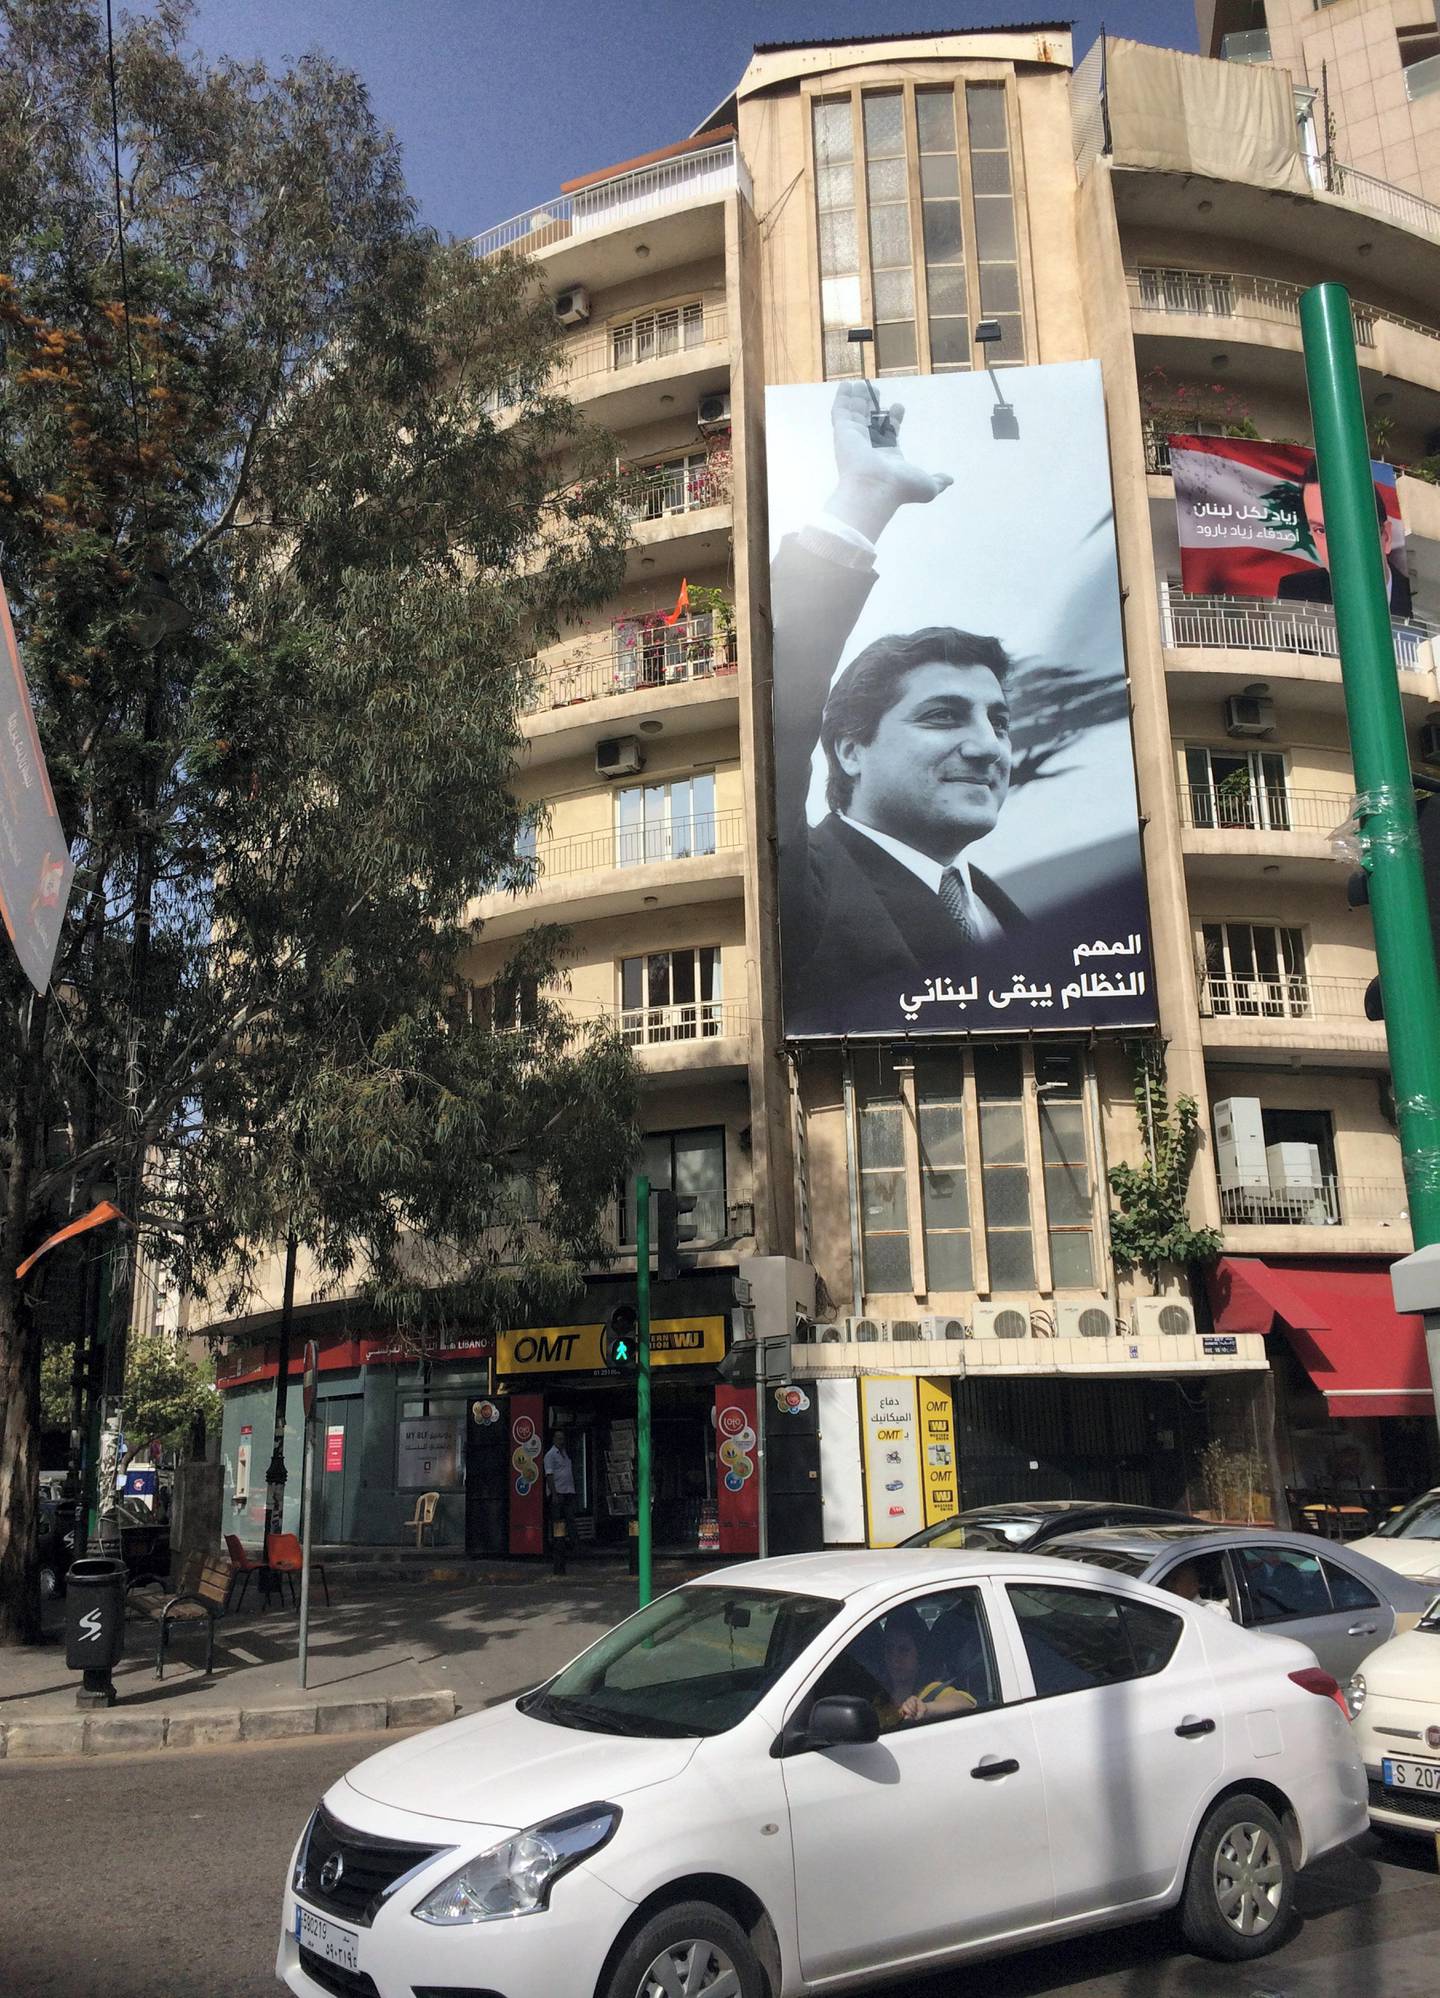 A huge banner shows Lebanon’s late president elect Bachir Gemayel, father of Nadim Gemayel, in Beirut’s Sassine Square. He was assassinated in September 1982. Arthur MacMillan / The National